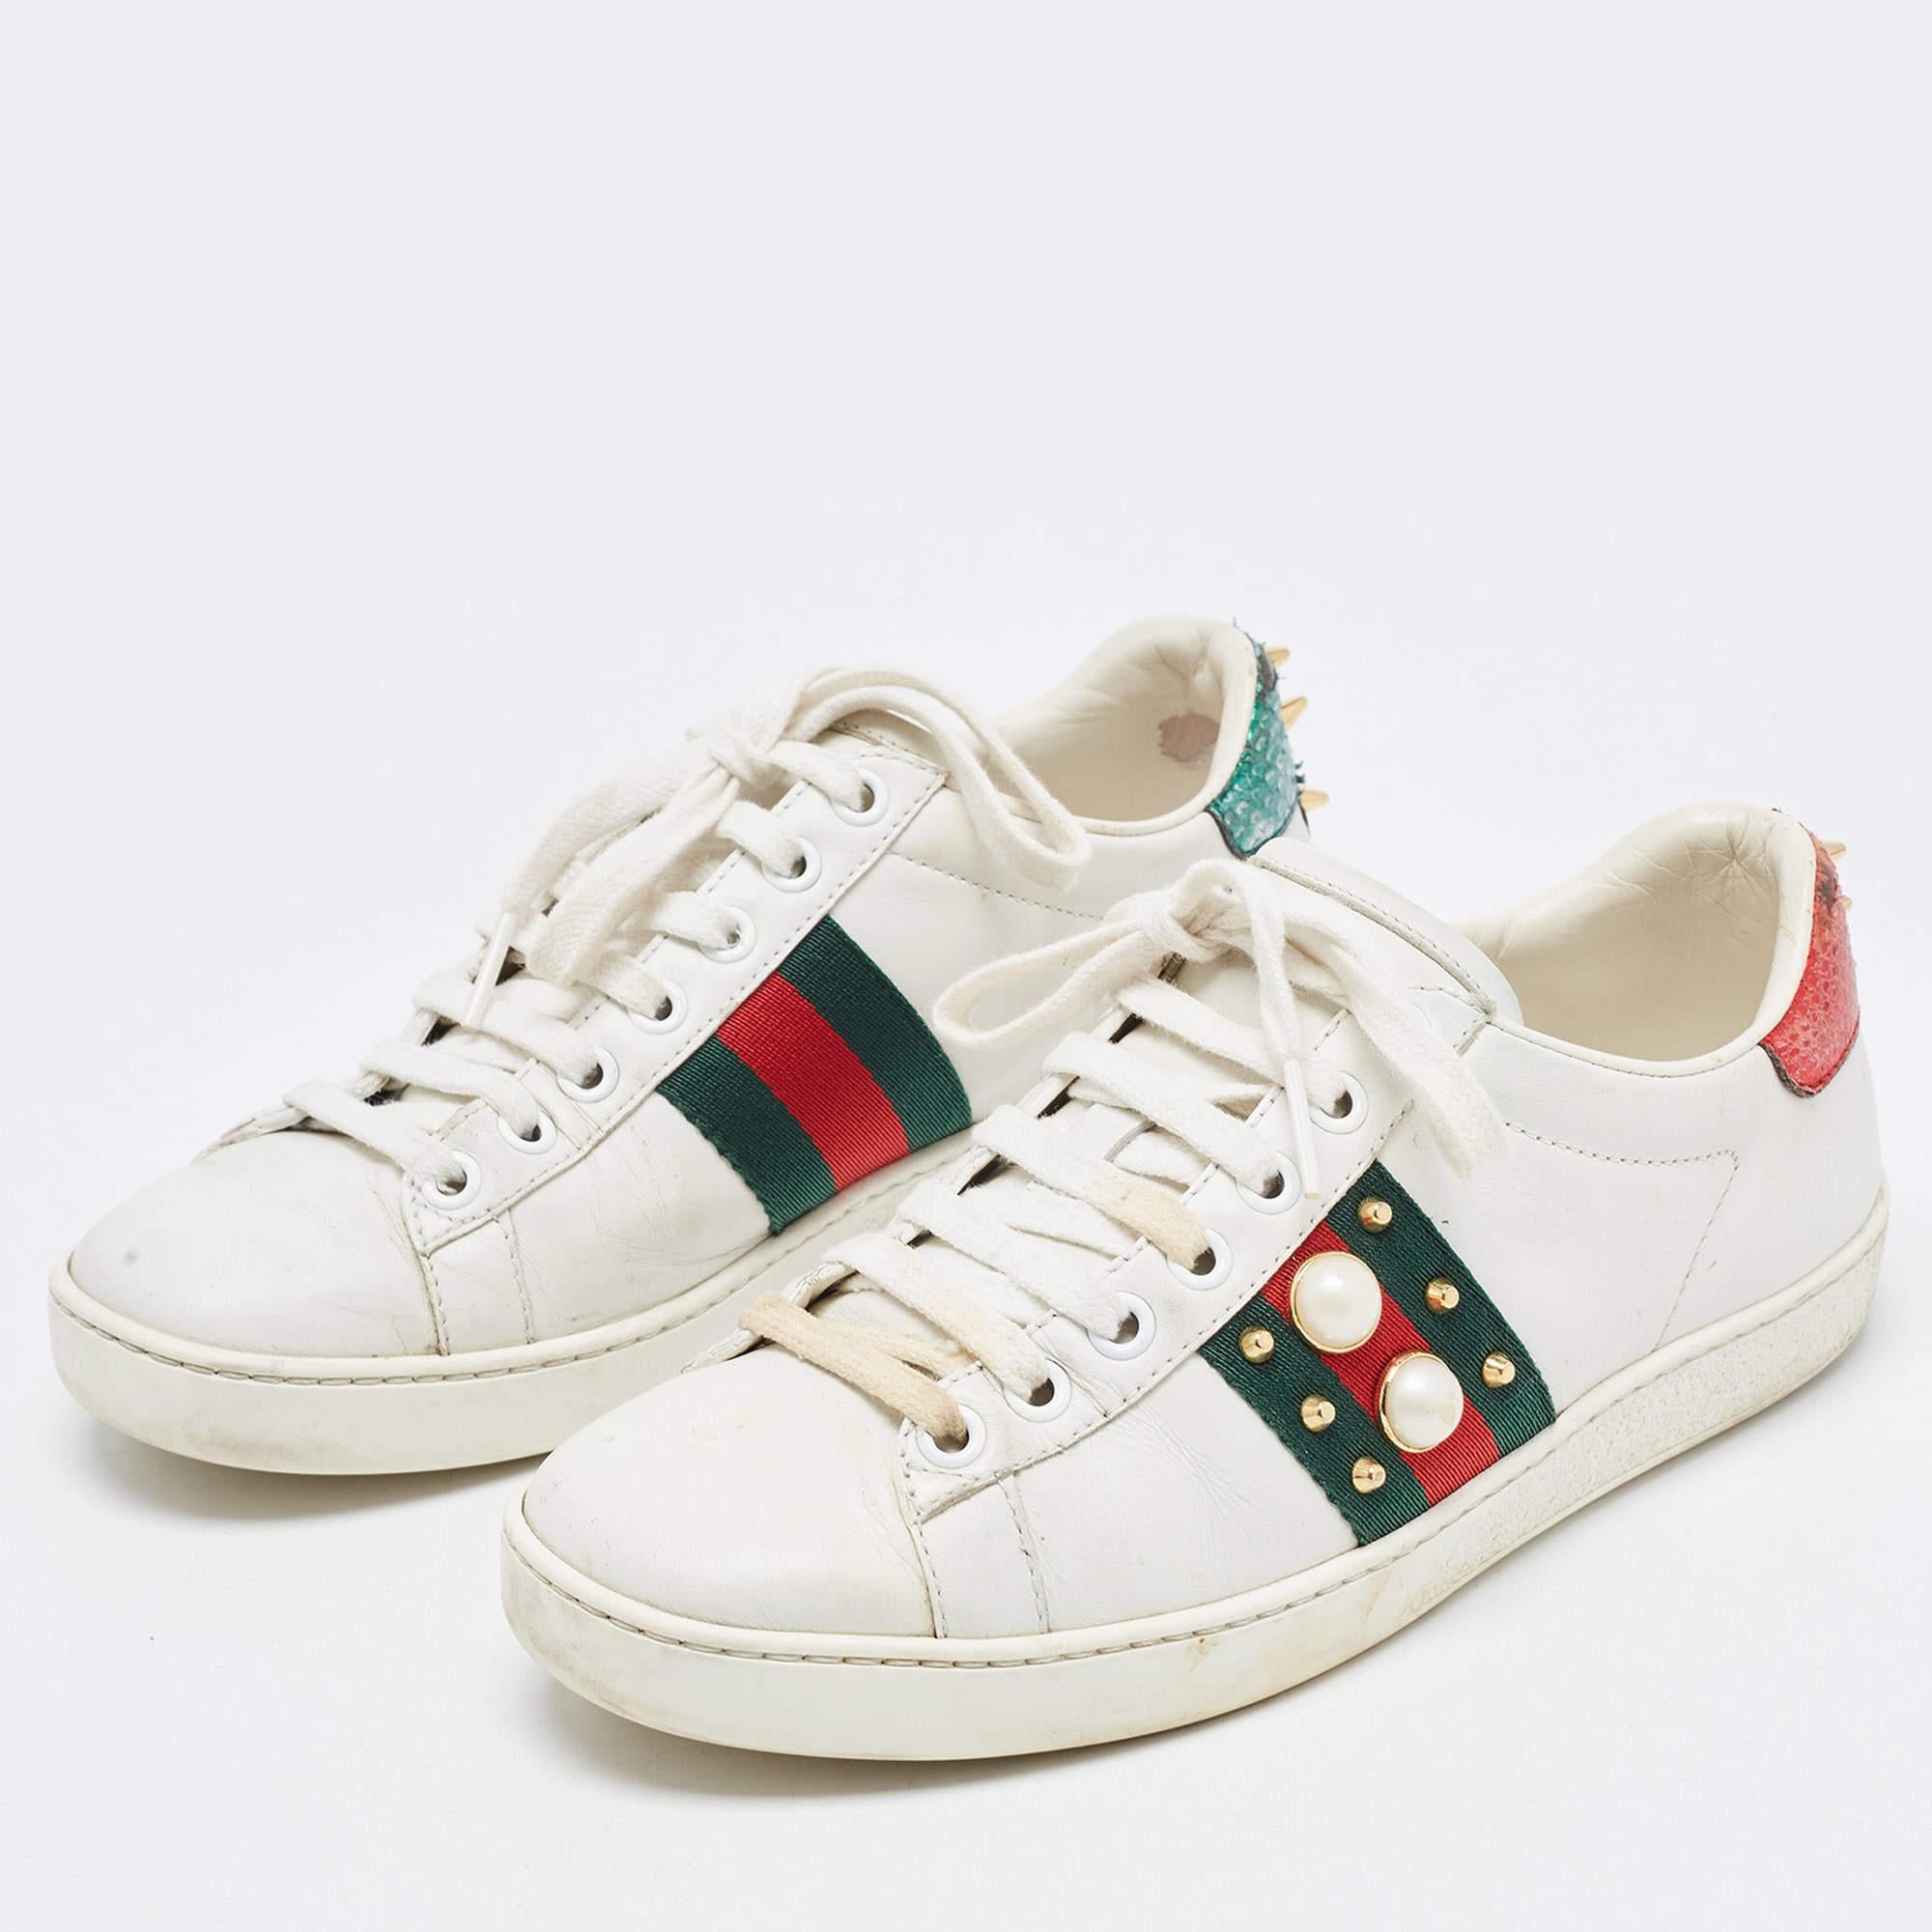 Gucci White Leather Faux Pearl Embellished Ace Low Top Sneakers Size 35 In Fair Condition For Sale In Dubai, Al Qouz 2